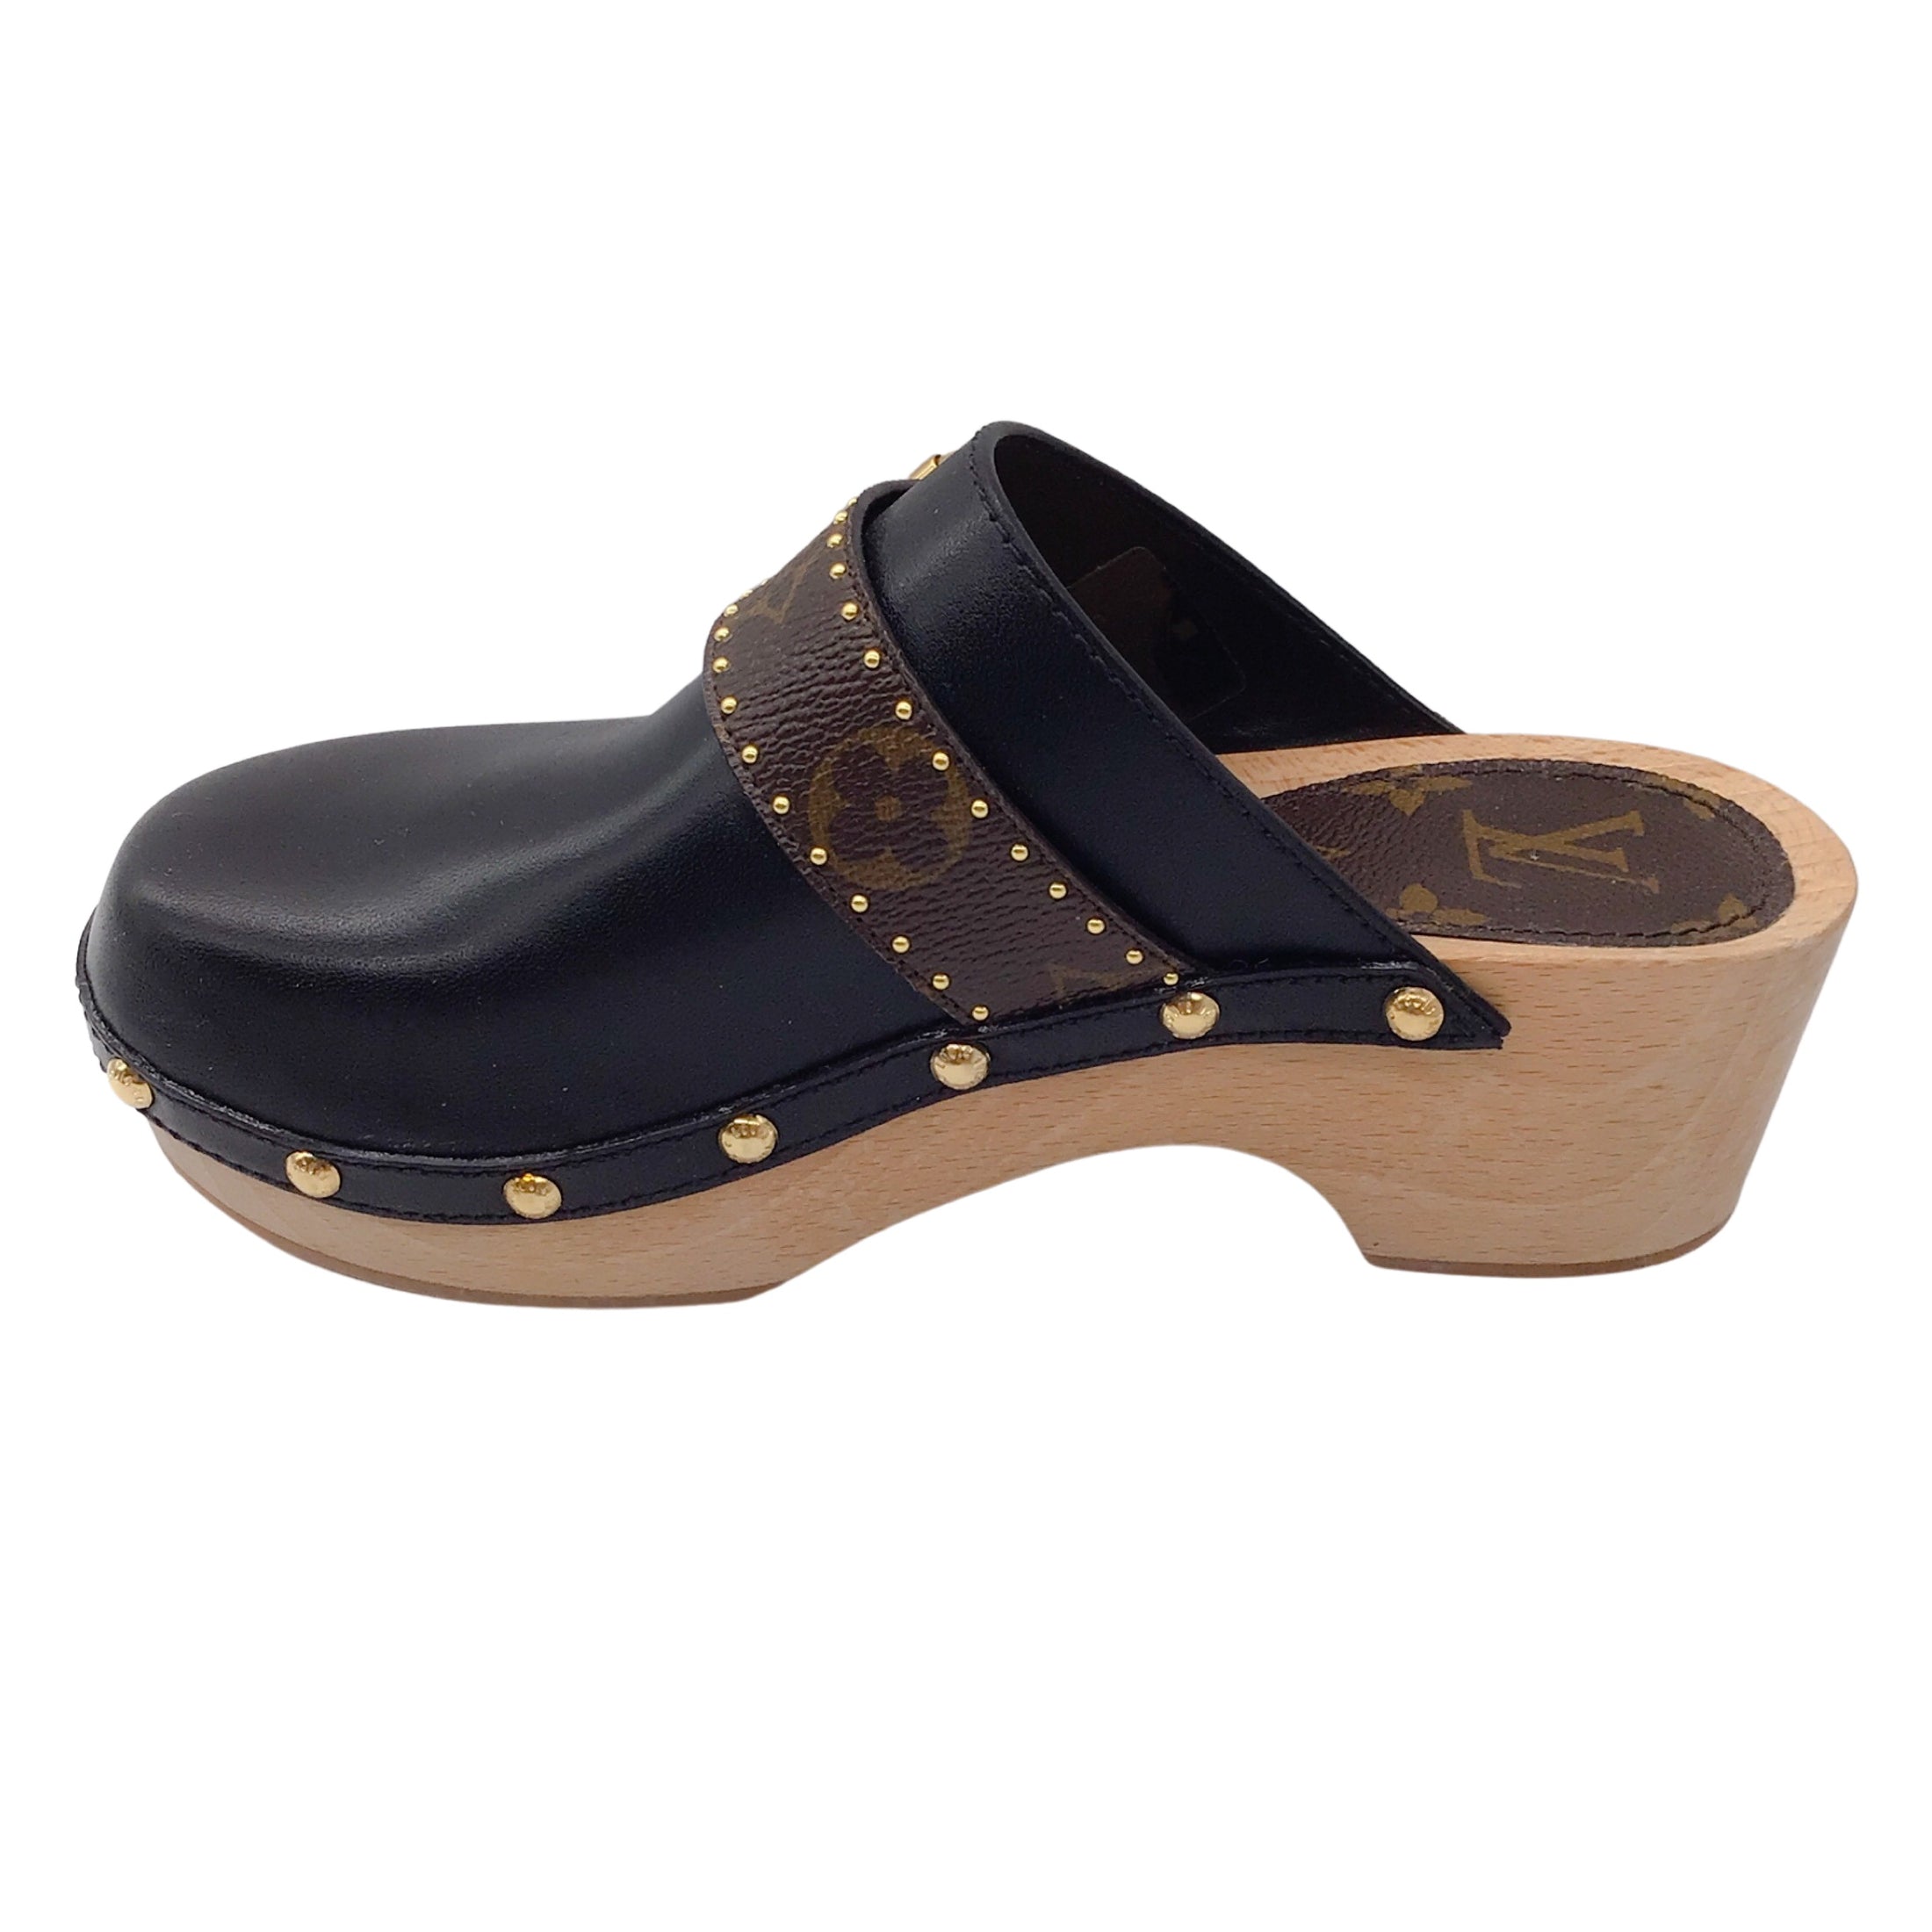 Louis Vuitton Black / Brown Monogram Coated Canvas and Leather Cottage Clog Mules